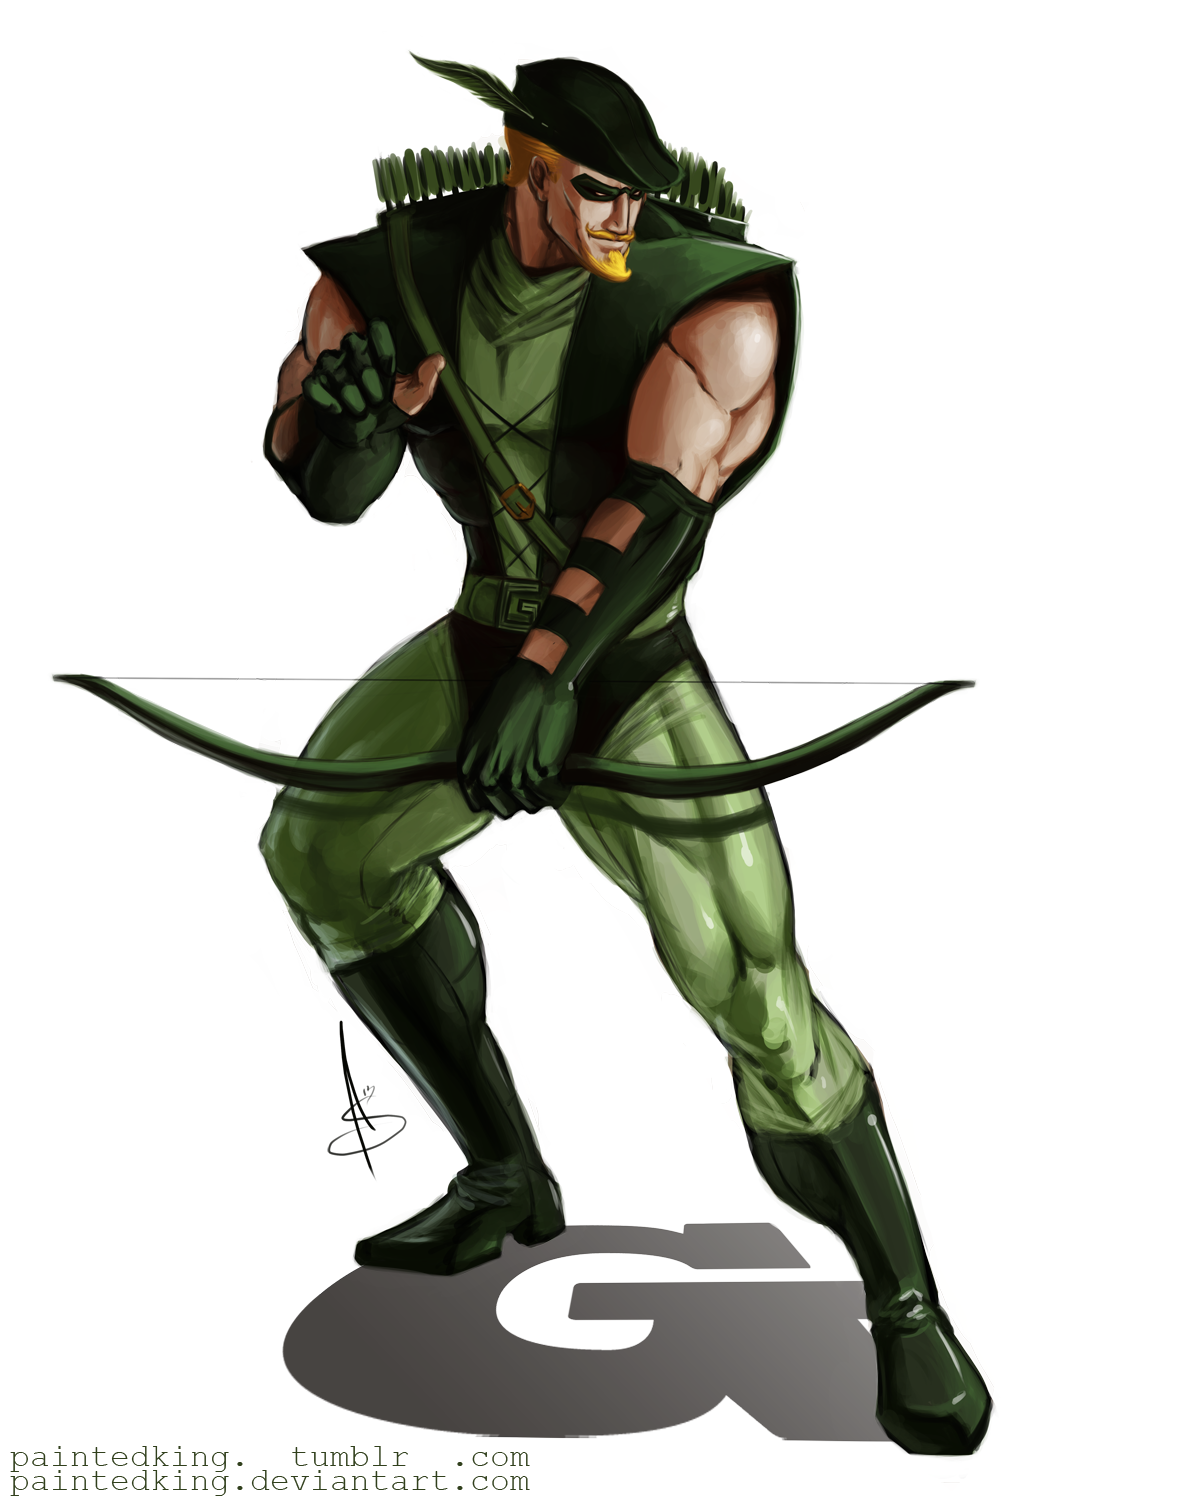 Arrow oliver queen by. Archer clipart green archer